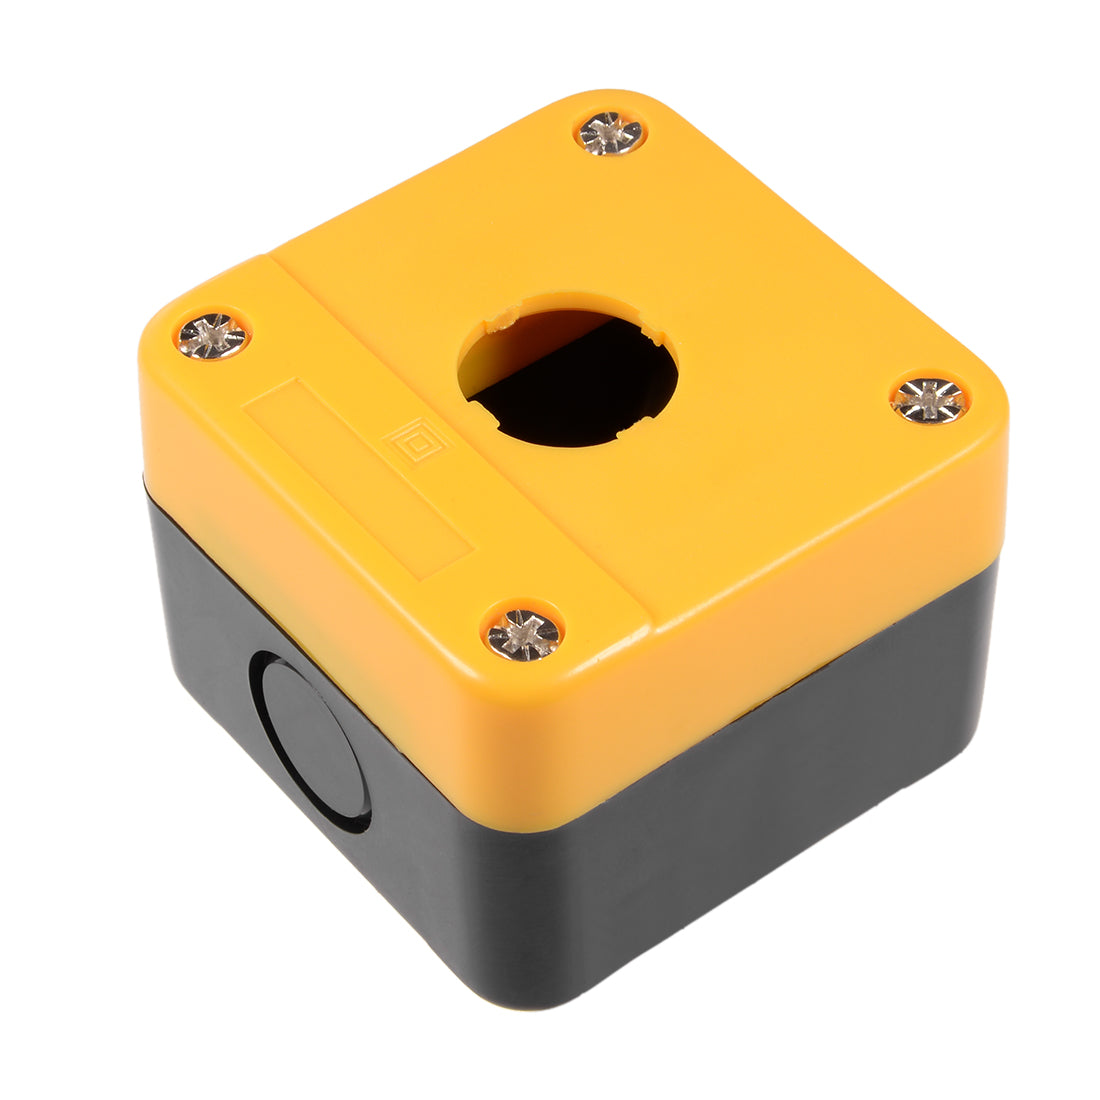 uxcell Uxcell Push Button Switch Control Station Box 22mm 1 Button Hole Waterproof Yellow and Black